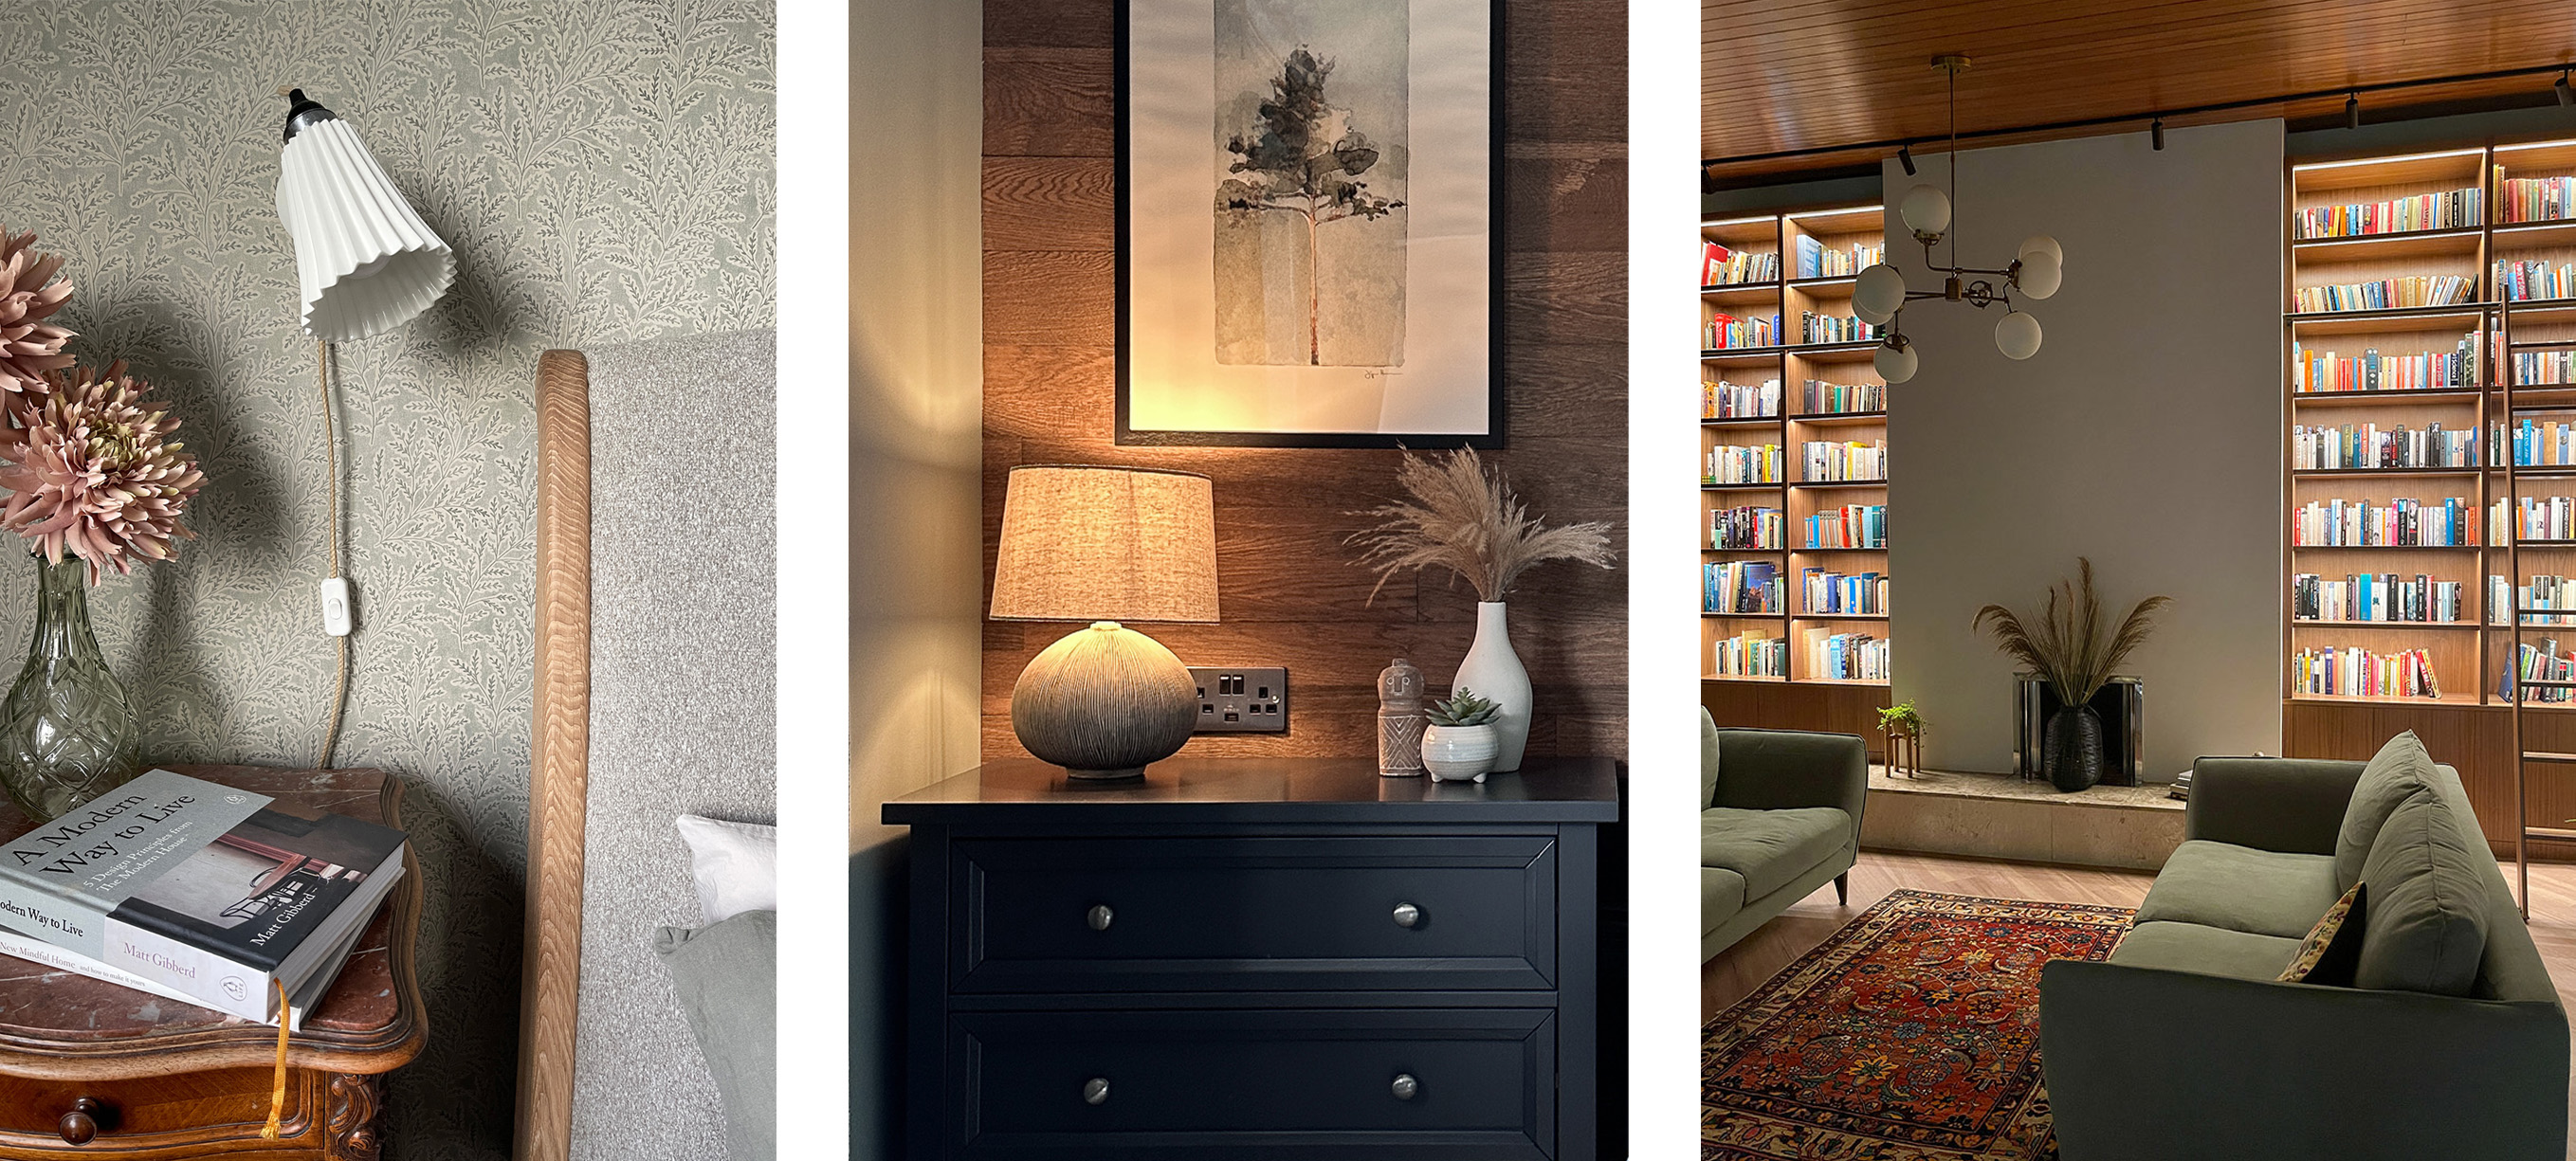 The picture shows three different types of lighting, the first is task lighting showing a bedside wall light, the second is ambient lighting showing a lamp and the third is decorative lighting showing a bookcase with integrated LED lighting.